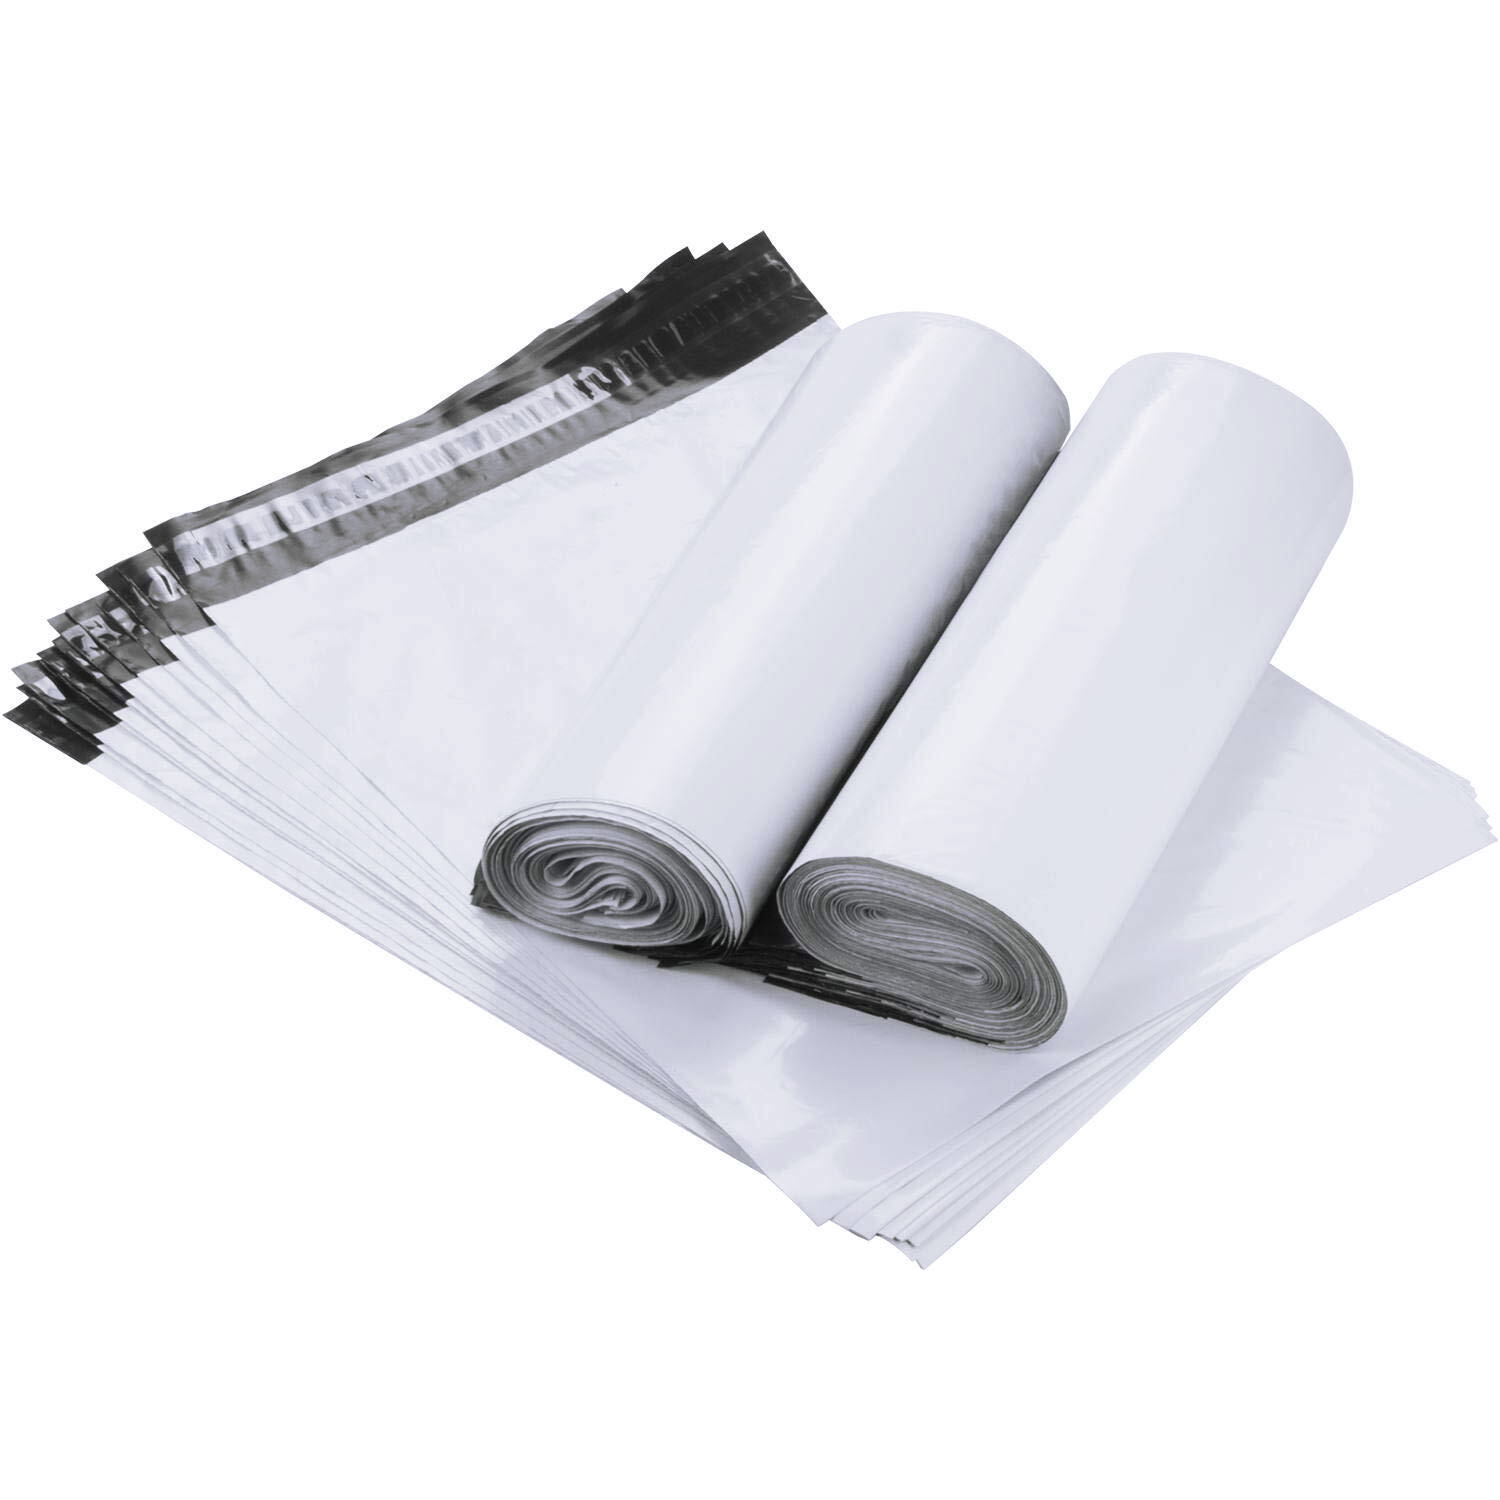 100 X Poly Mailers Envelopes Shipping Bags (20cm x 35cm)